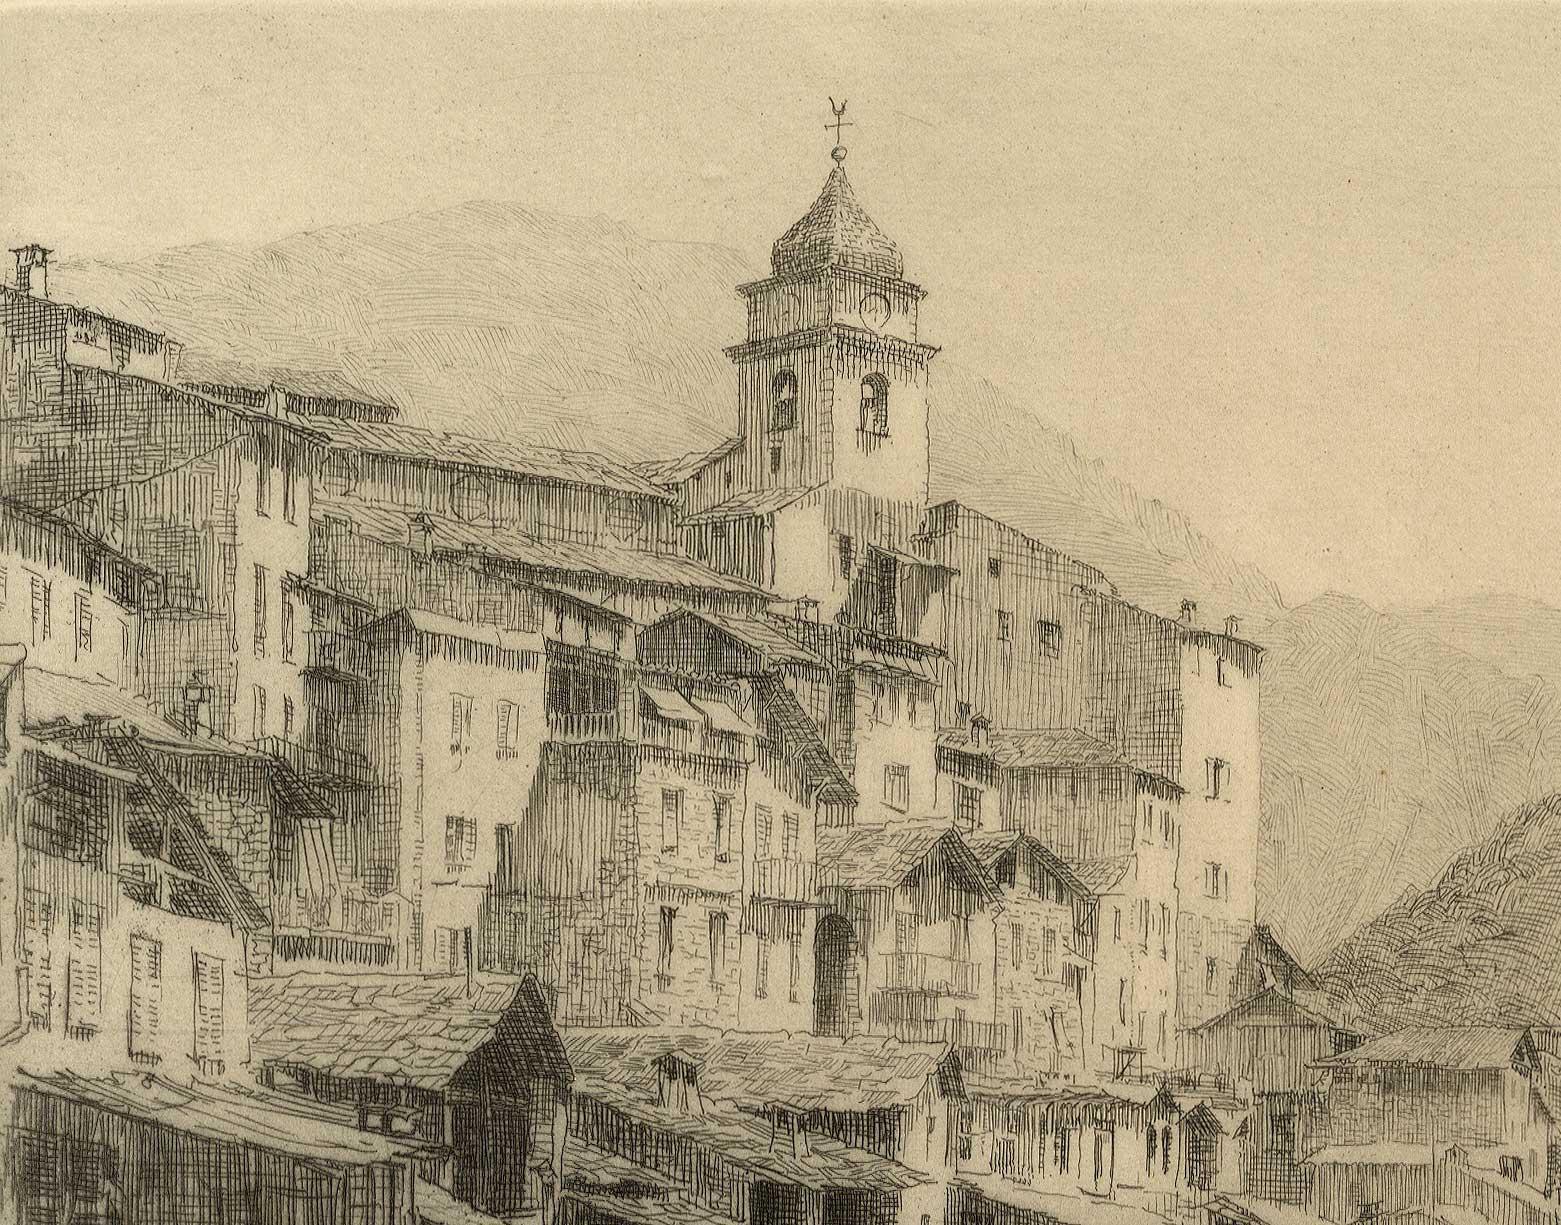 Saorge Village (Alpes-Maritimes area in southeastern France) - Print by Earl Stetson Crawford